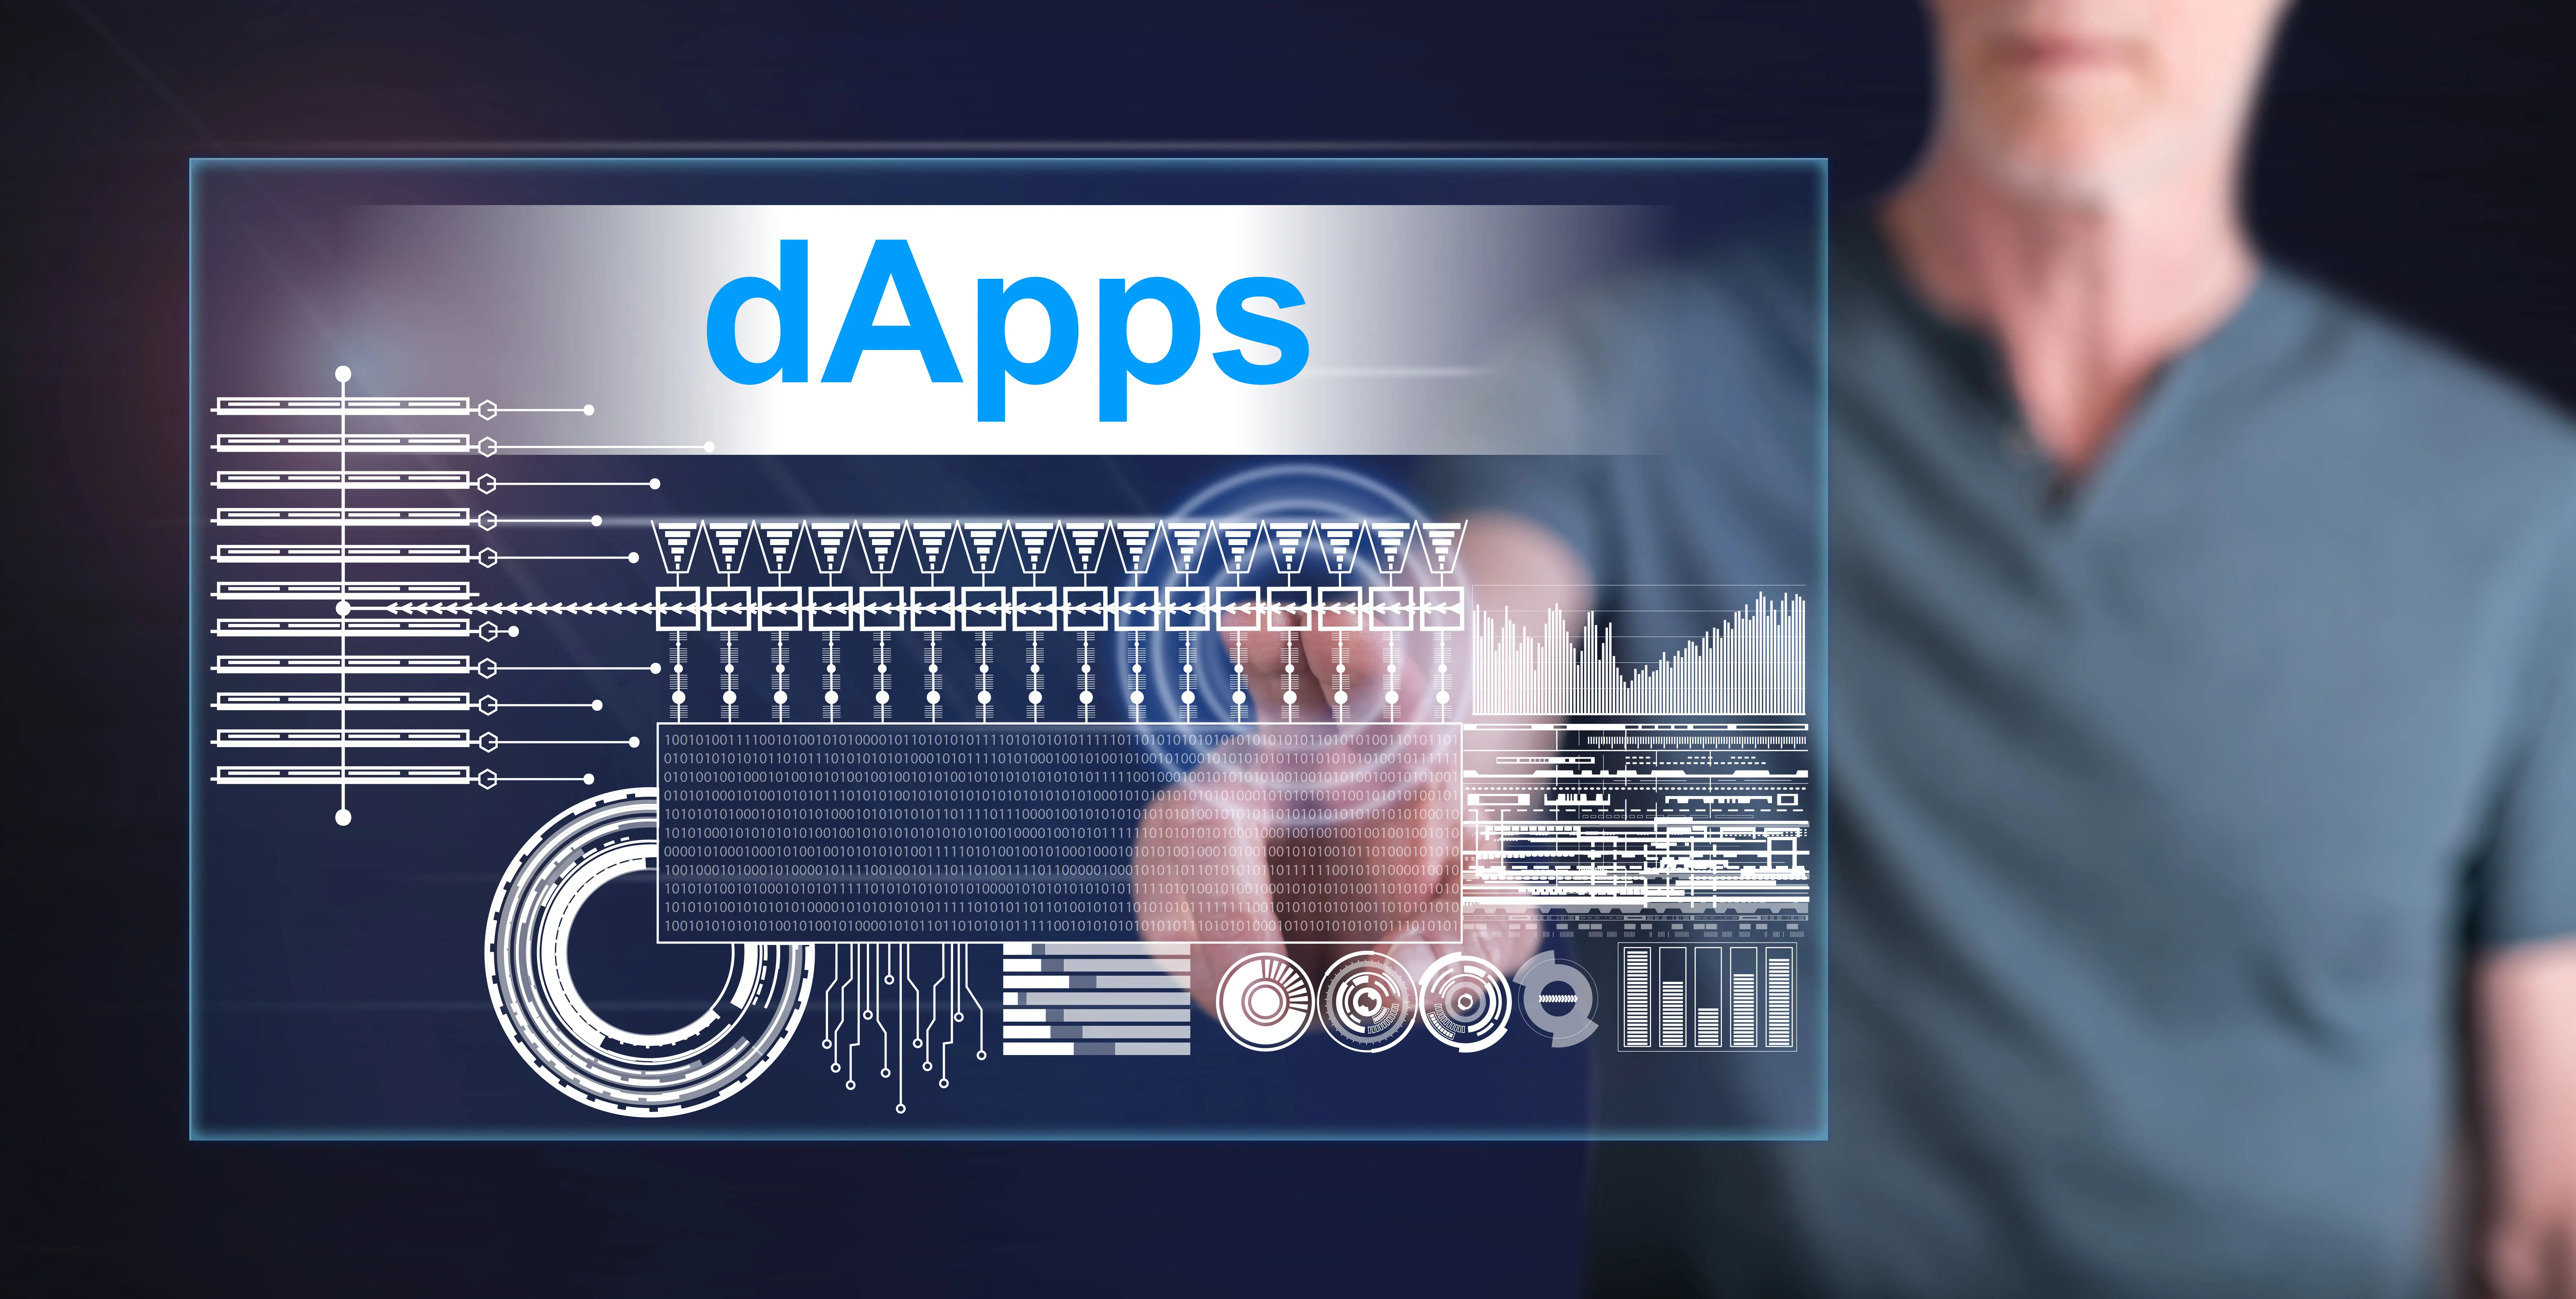 DApps (Decentralized Applications) are the latest trend. But are they fast enough?